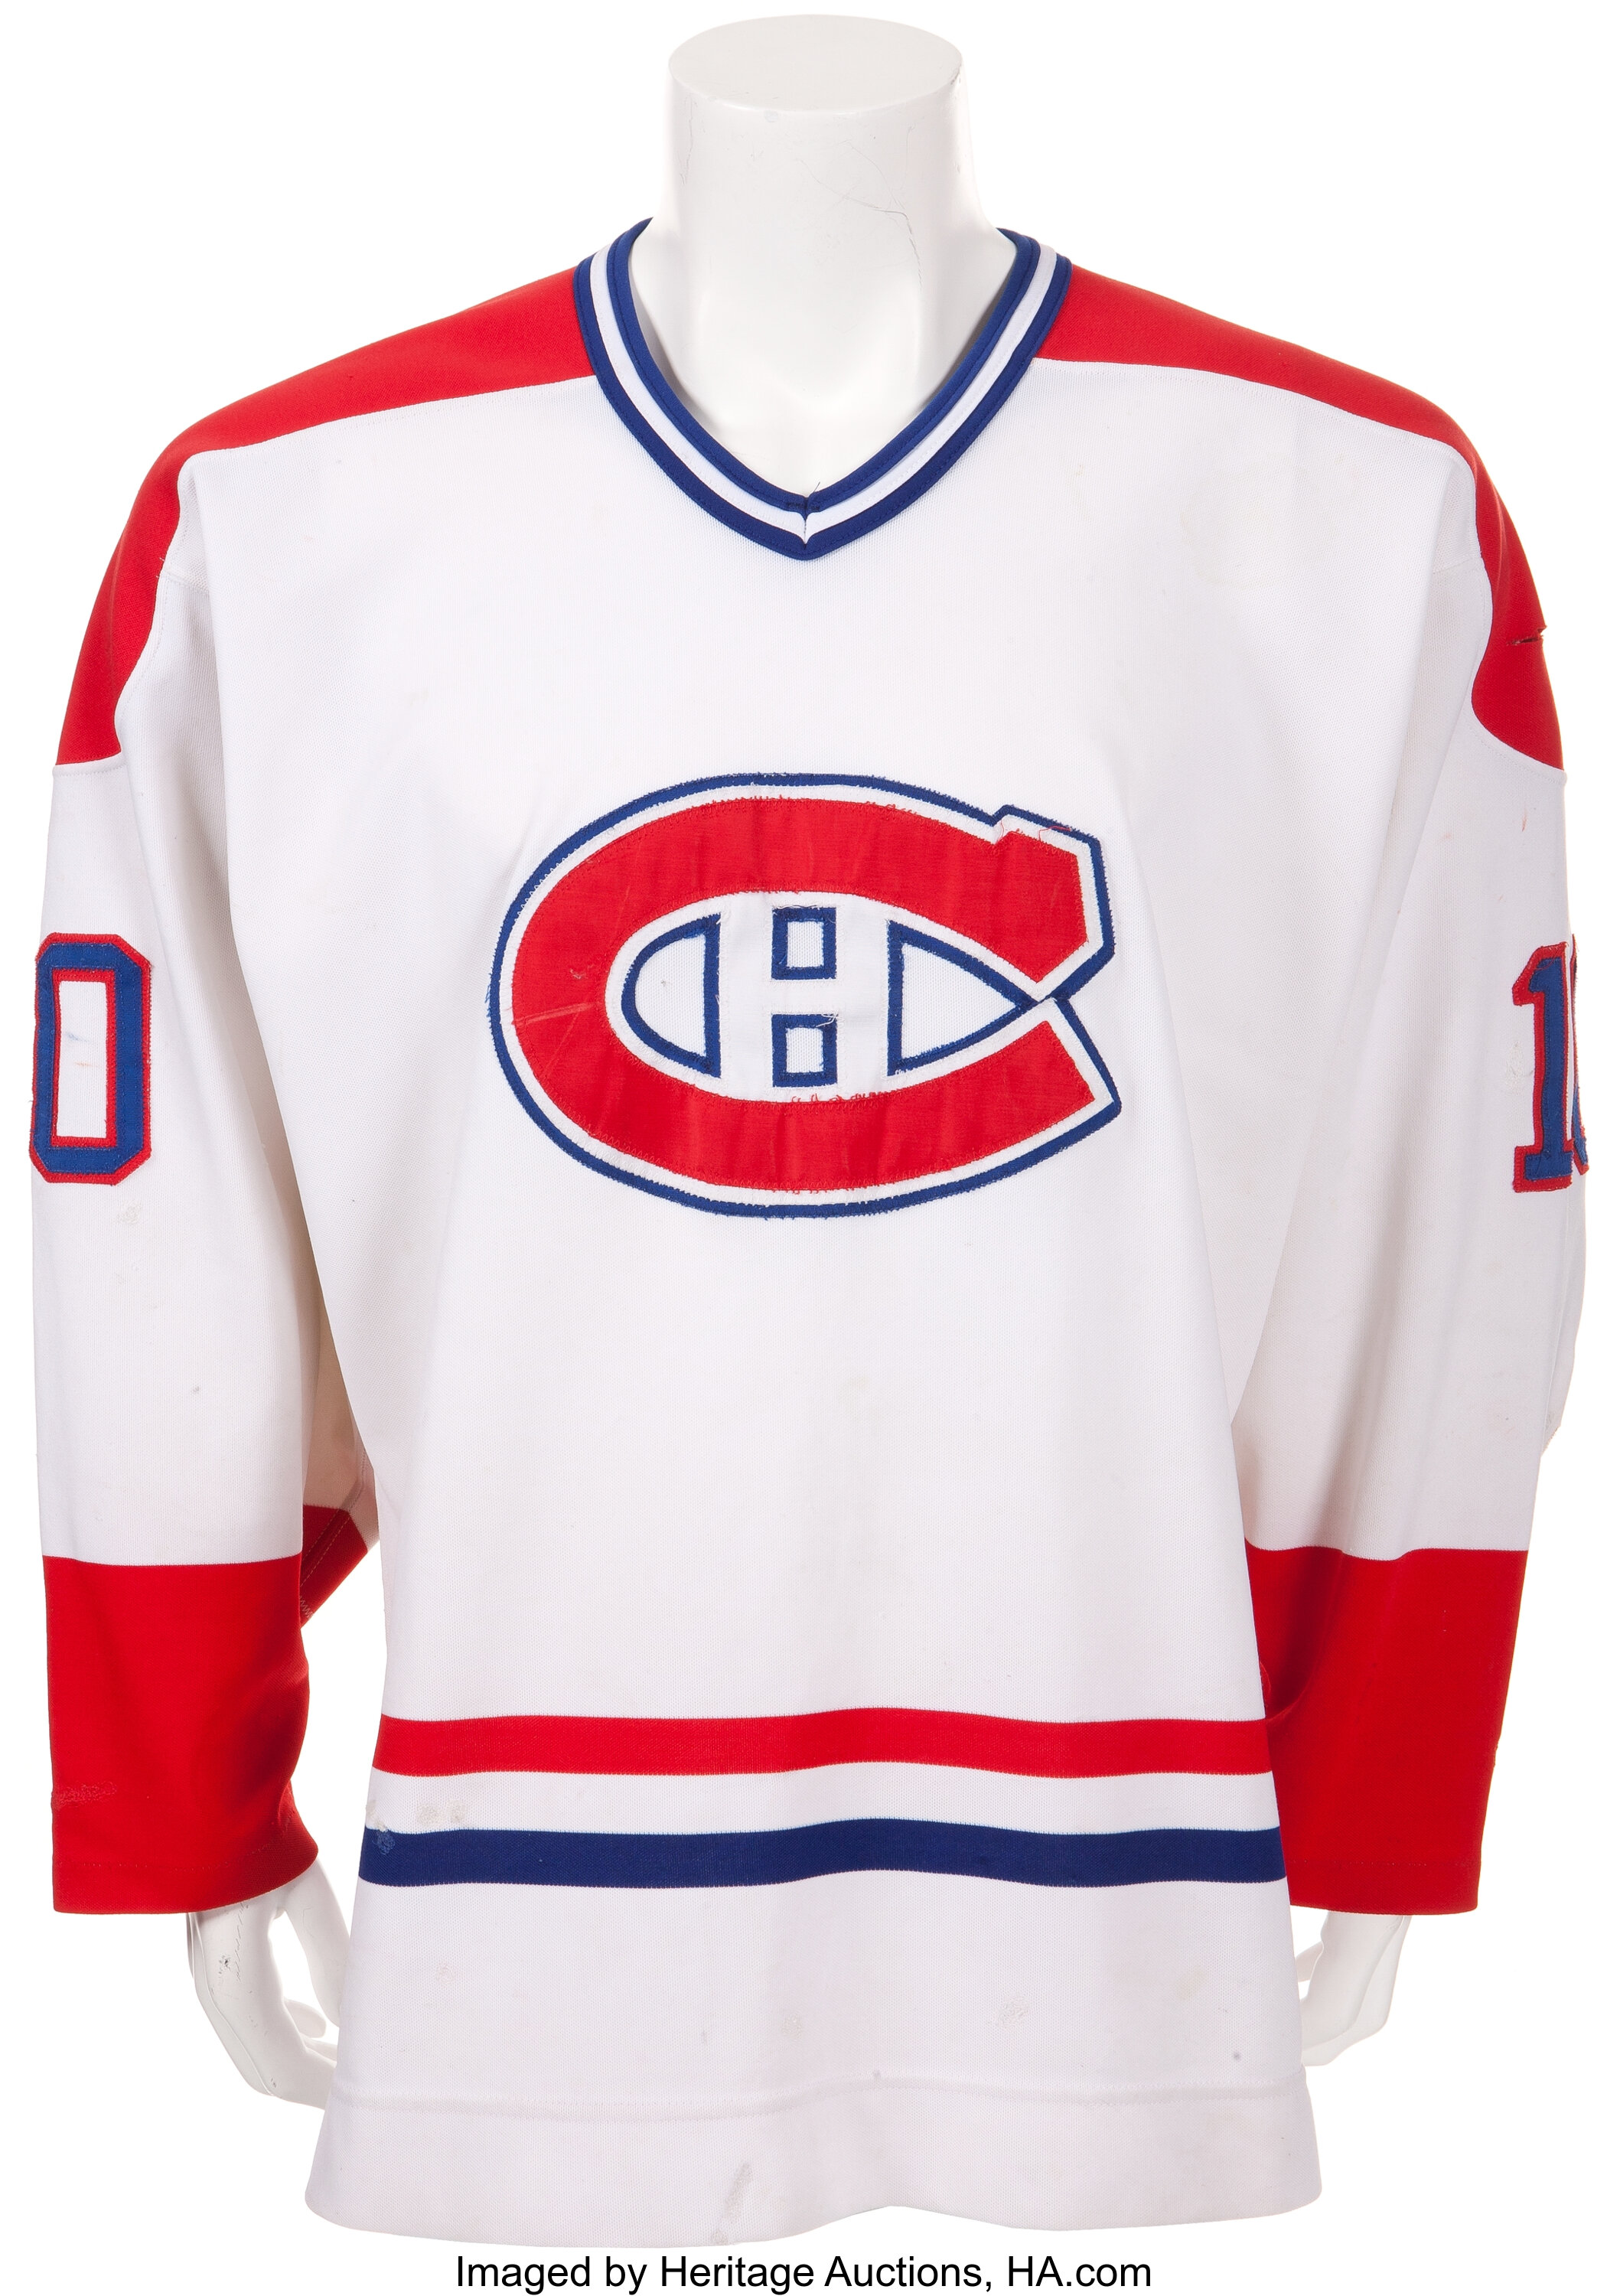 Montreal Canadiens: Uniforms for the NHL100 Classic Game